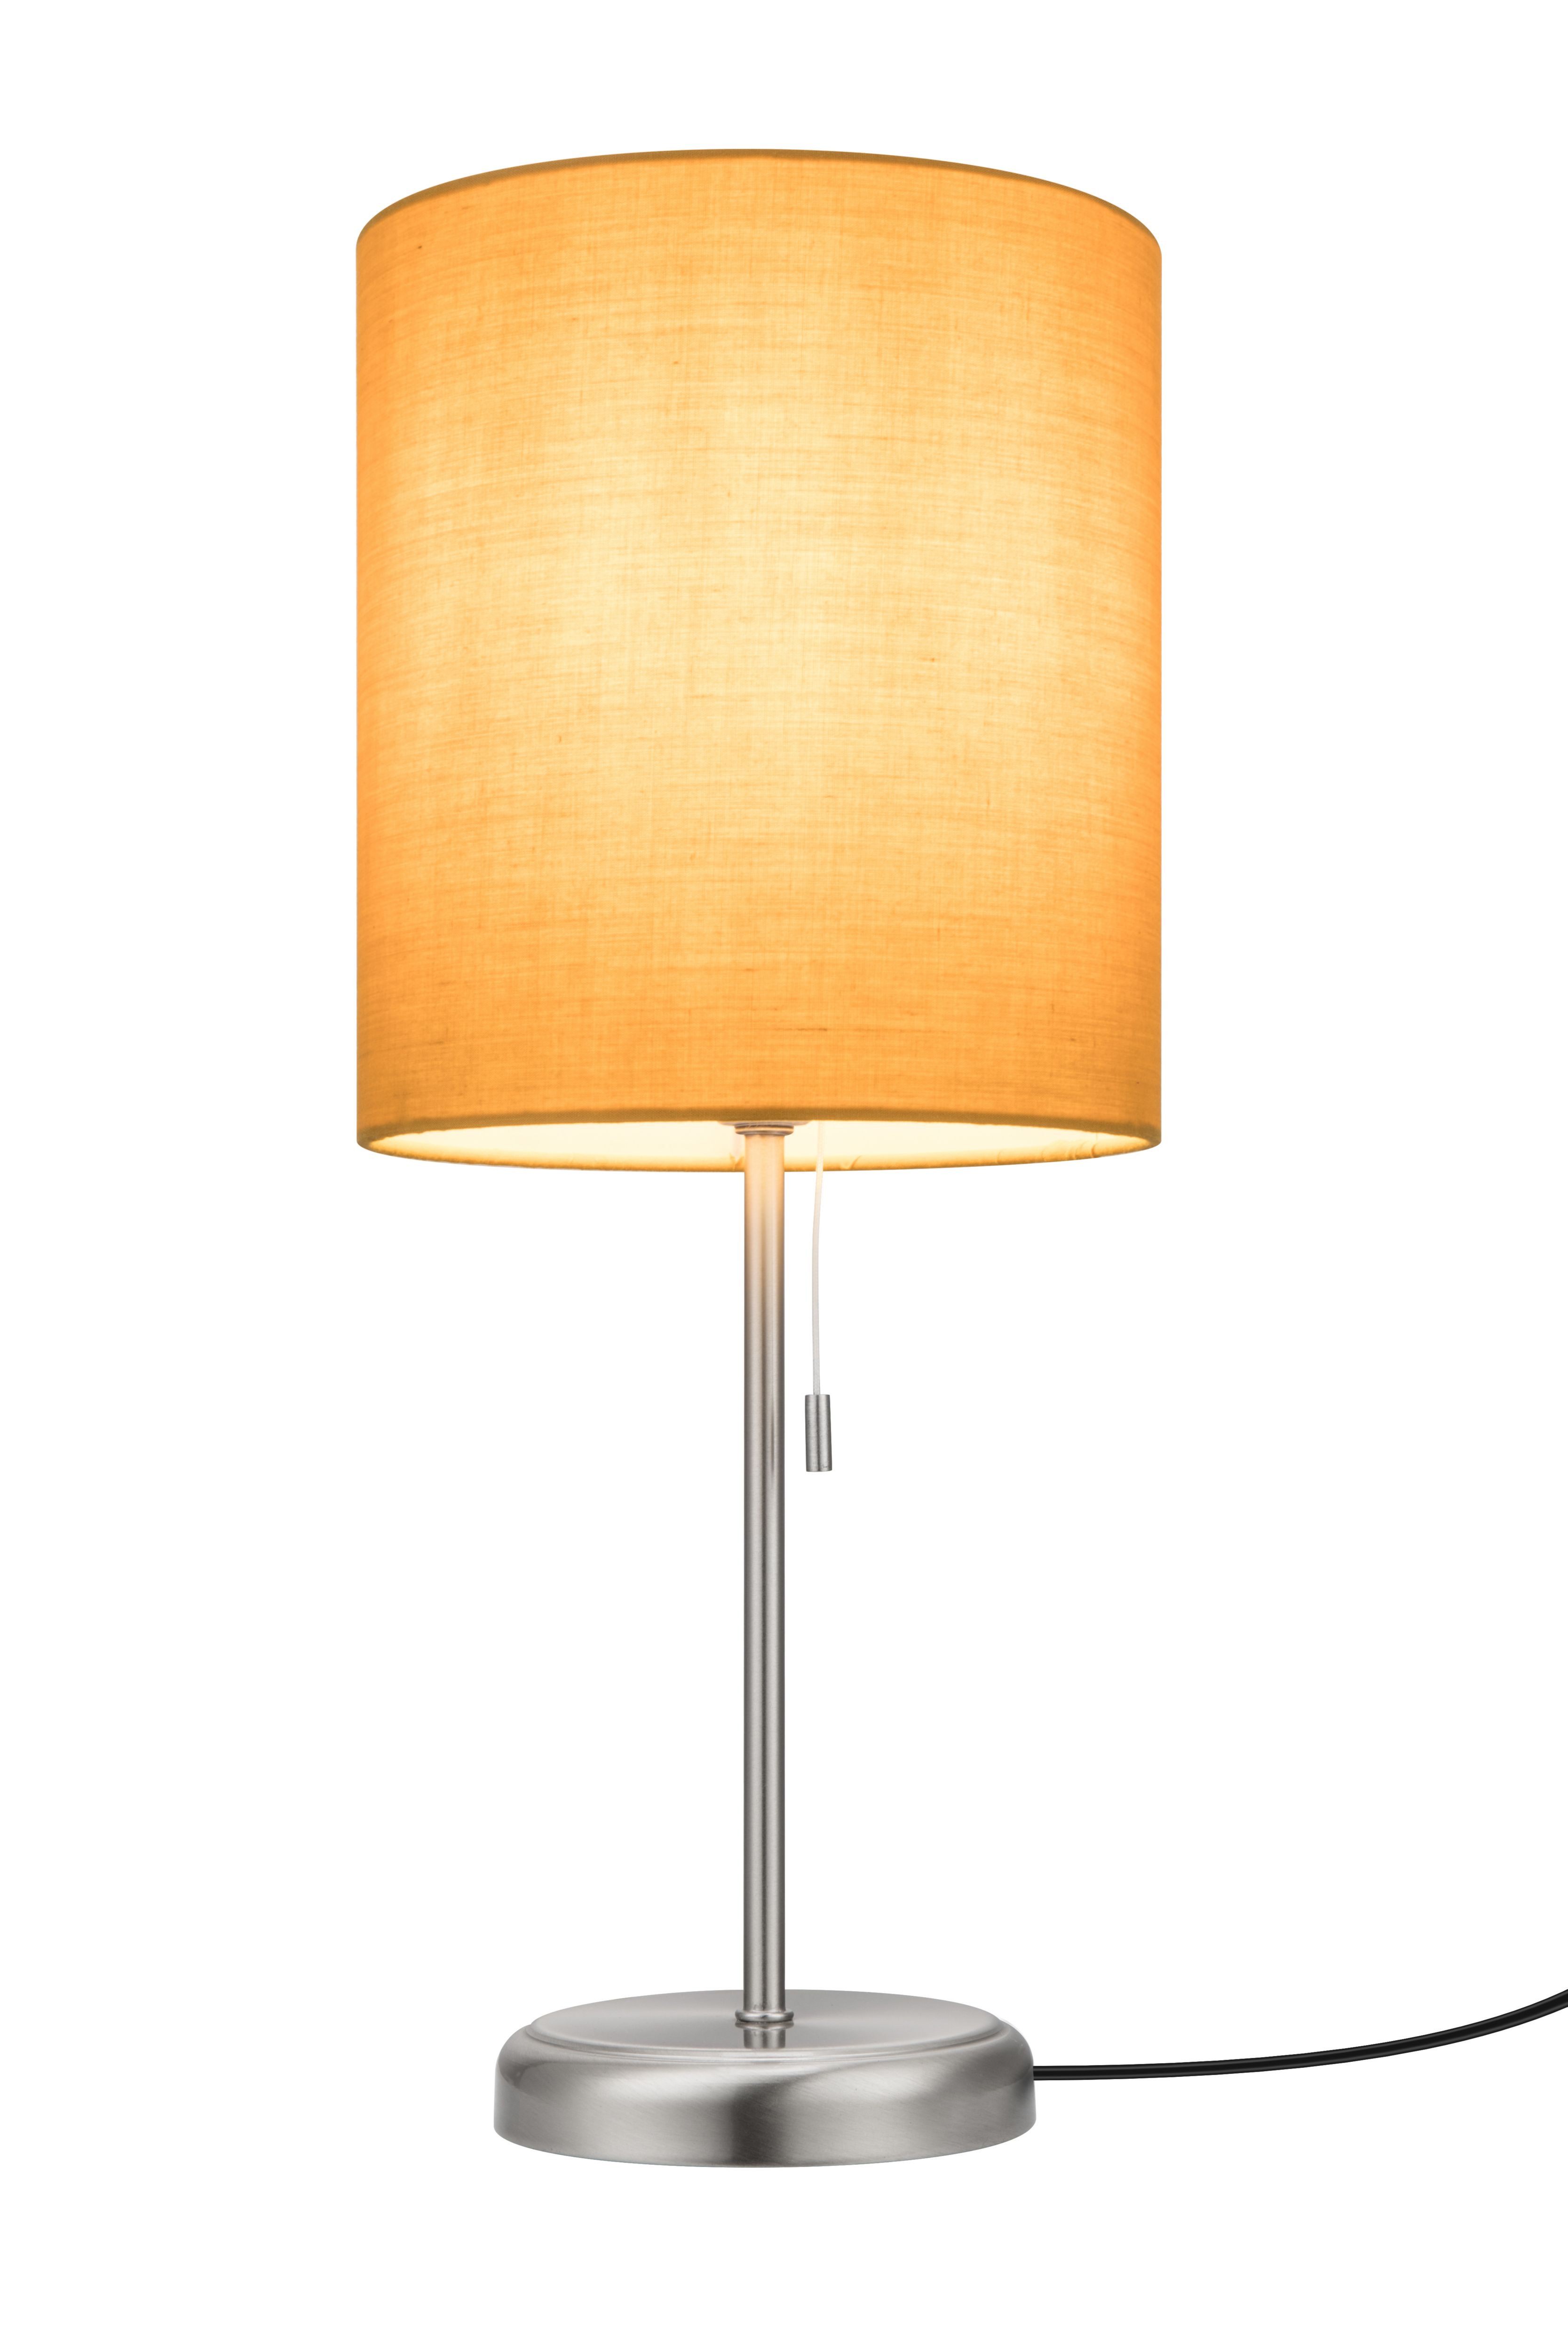 GoodHome Penistone Brushed Mustard Chrome effect Straight Table lamp